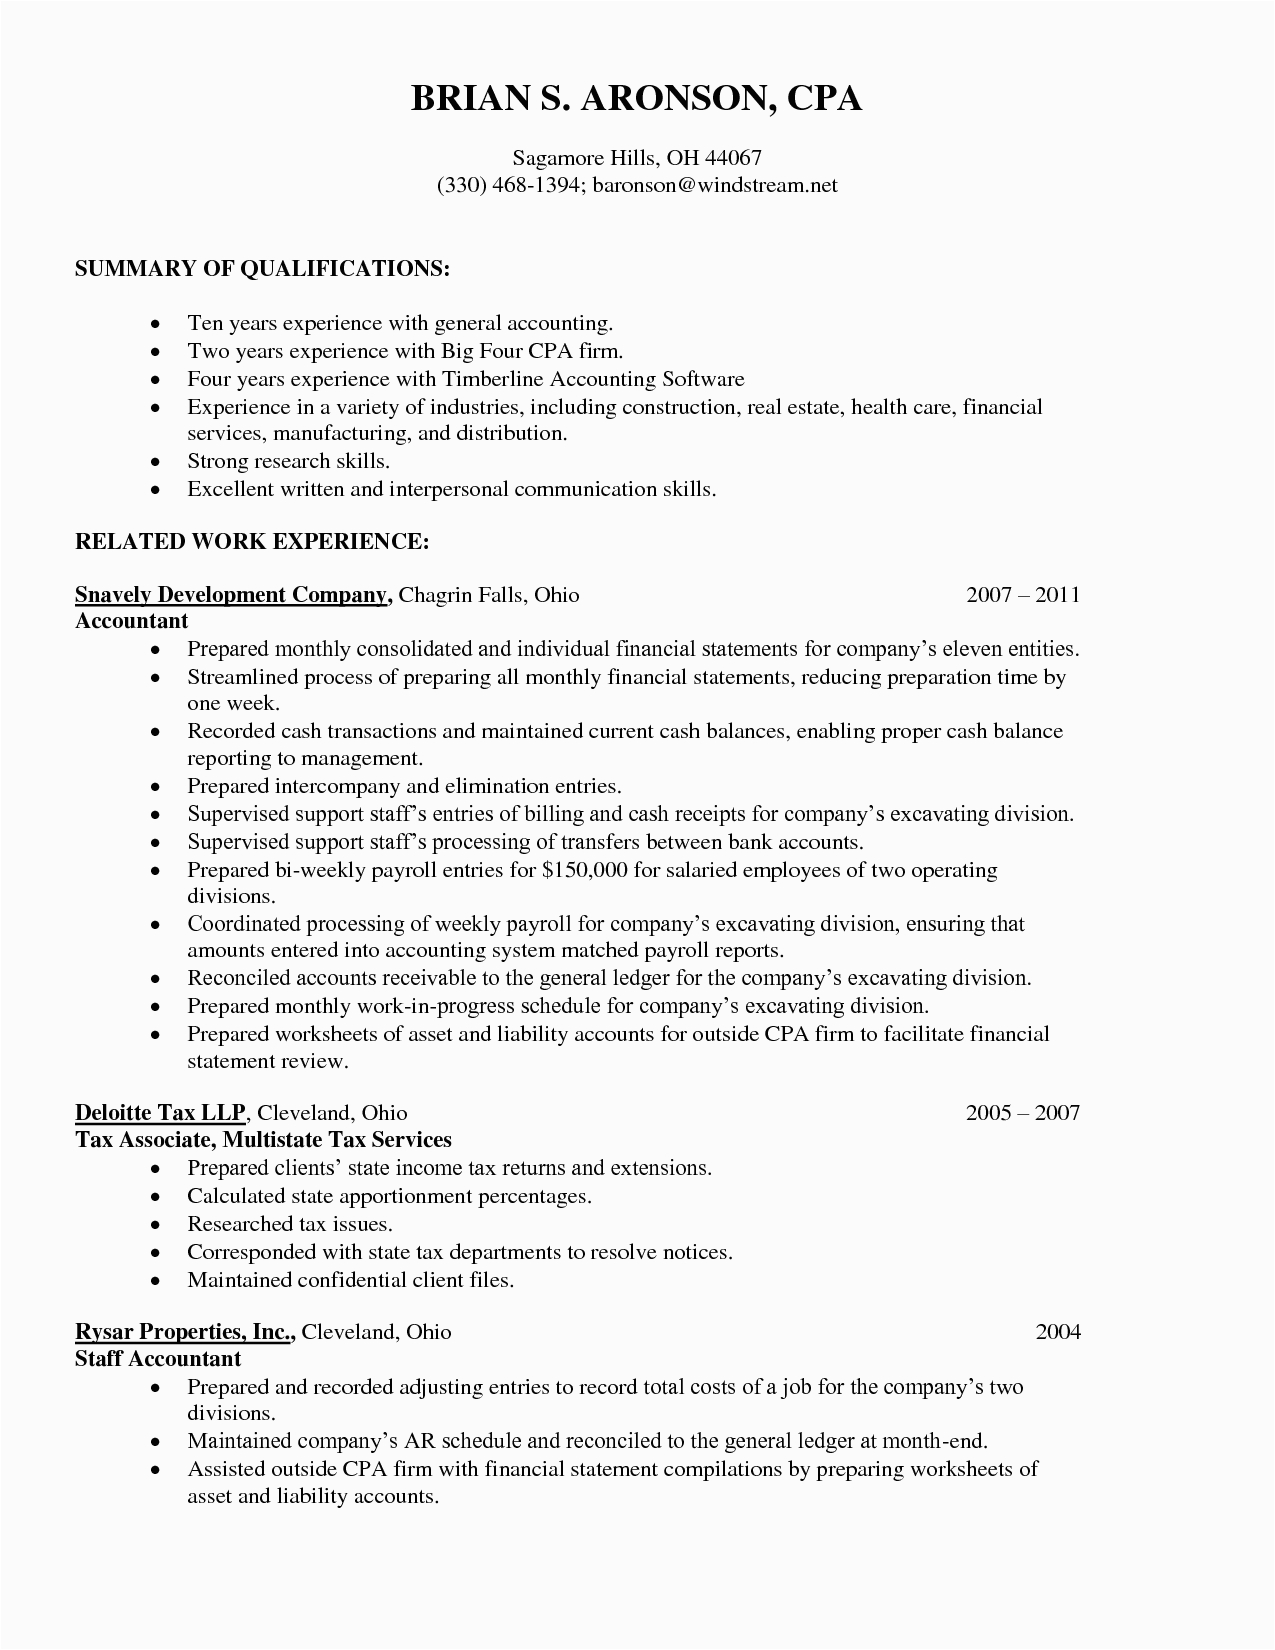 Sample Resume with Big 4 Tax Experience Big 4 Cv Template